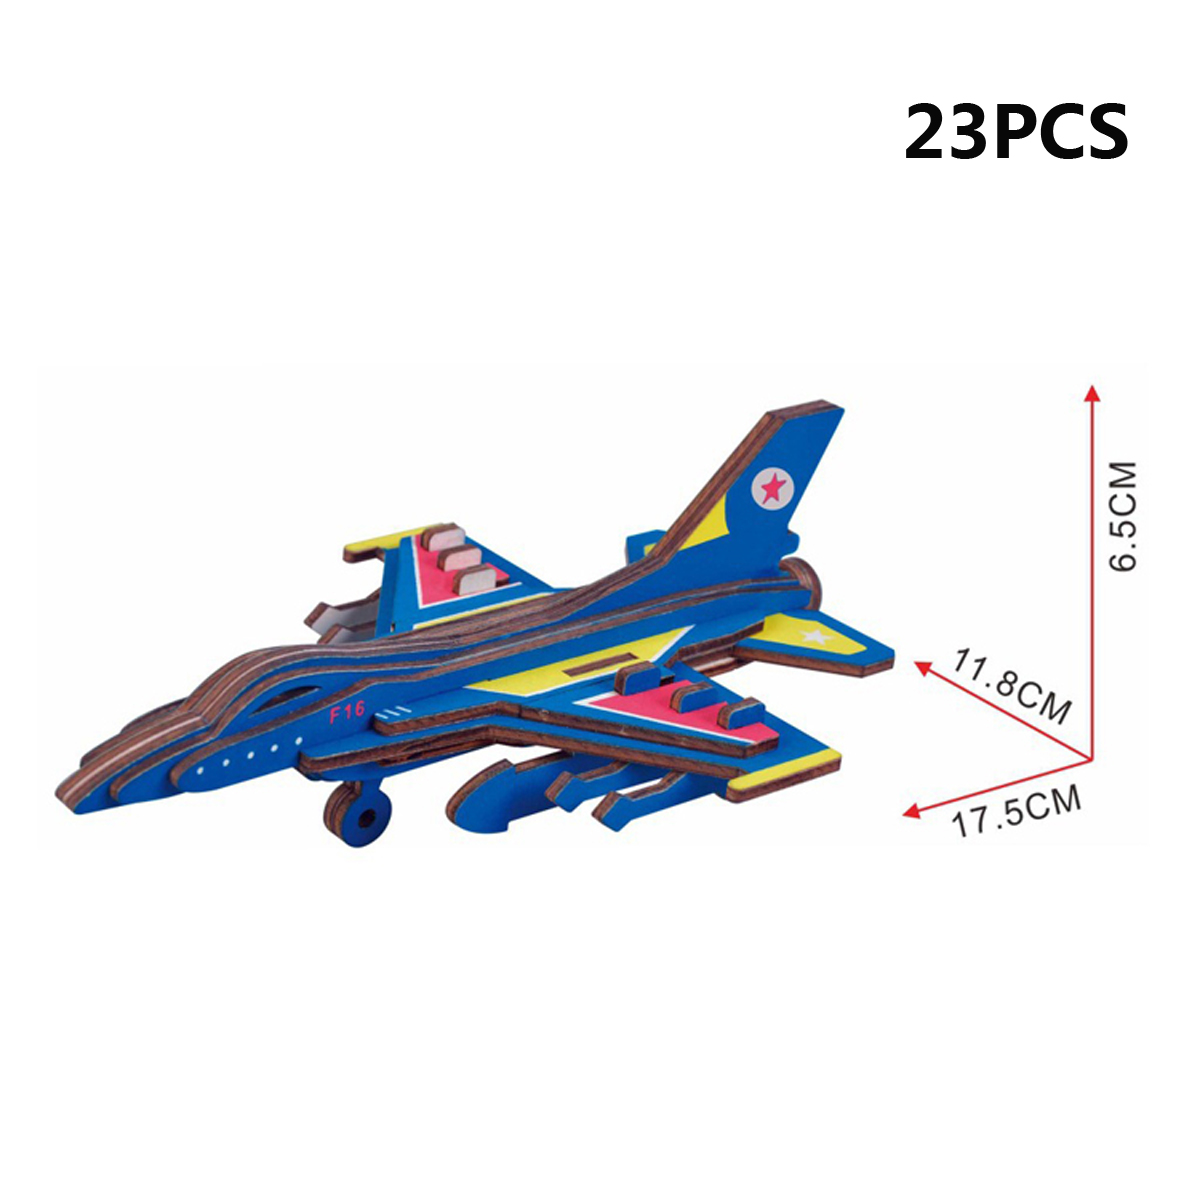 3D-Woodcraft-Assembly-Western-Fighter-Series-Kit-Jigsaw-Puzzle-Decoration-Toy-Model-for-Kids-Gift-1632732-4